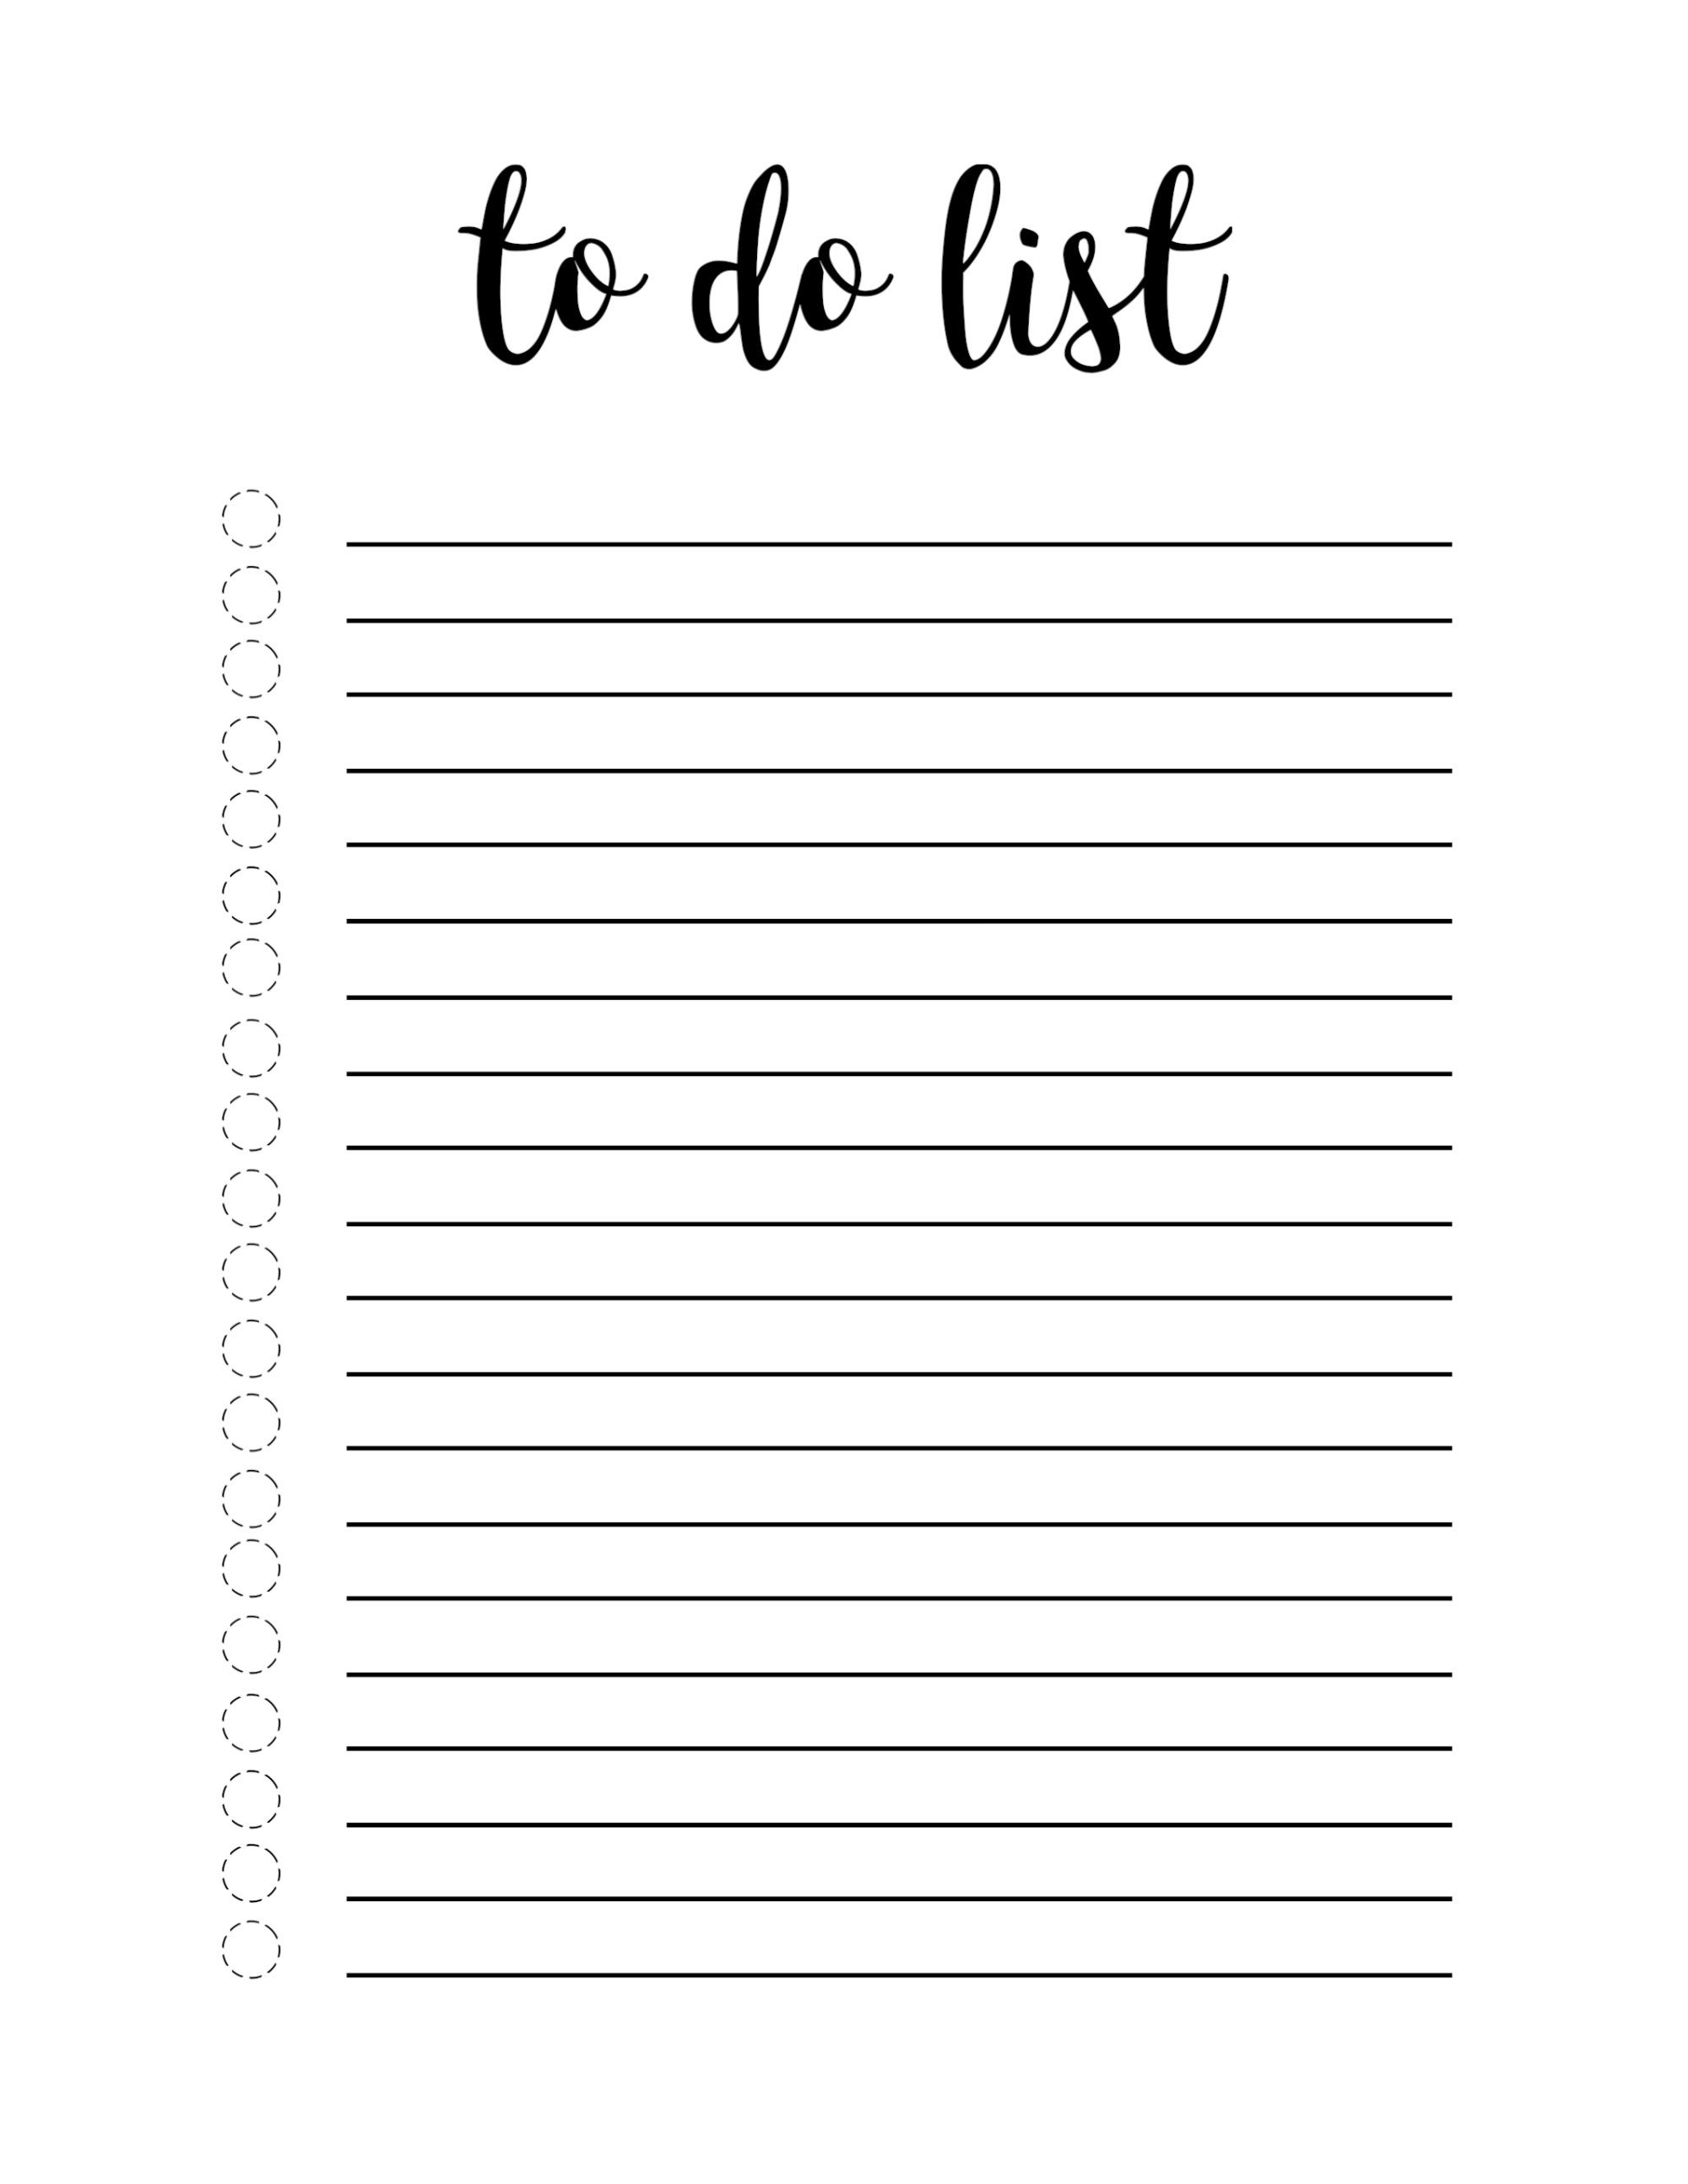 Free Printable To Do List Template | Making Notebooks | Pinterest - To Do List Free Printable